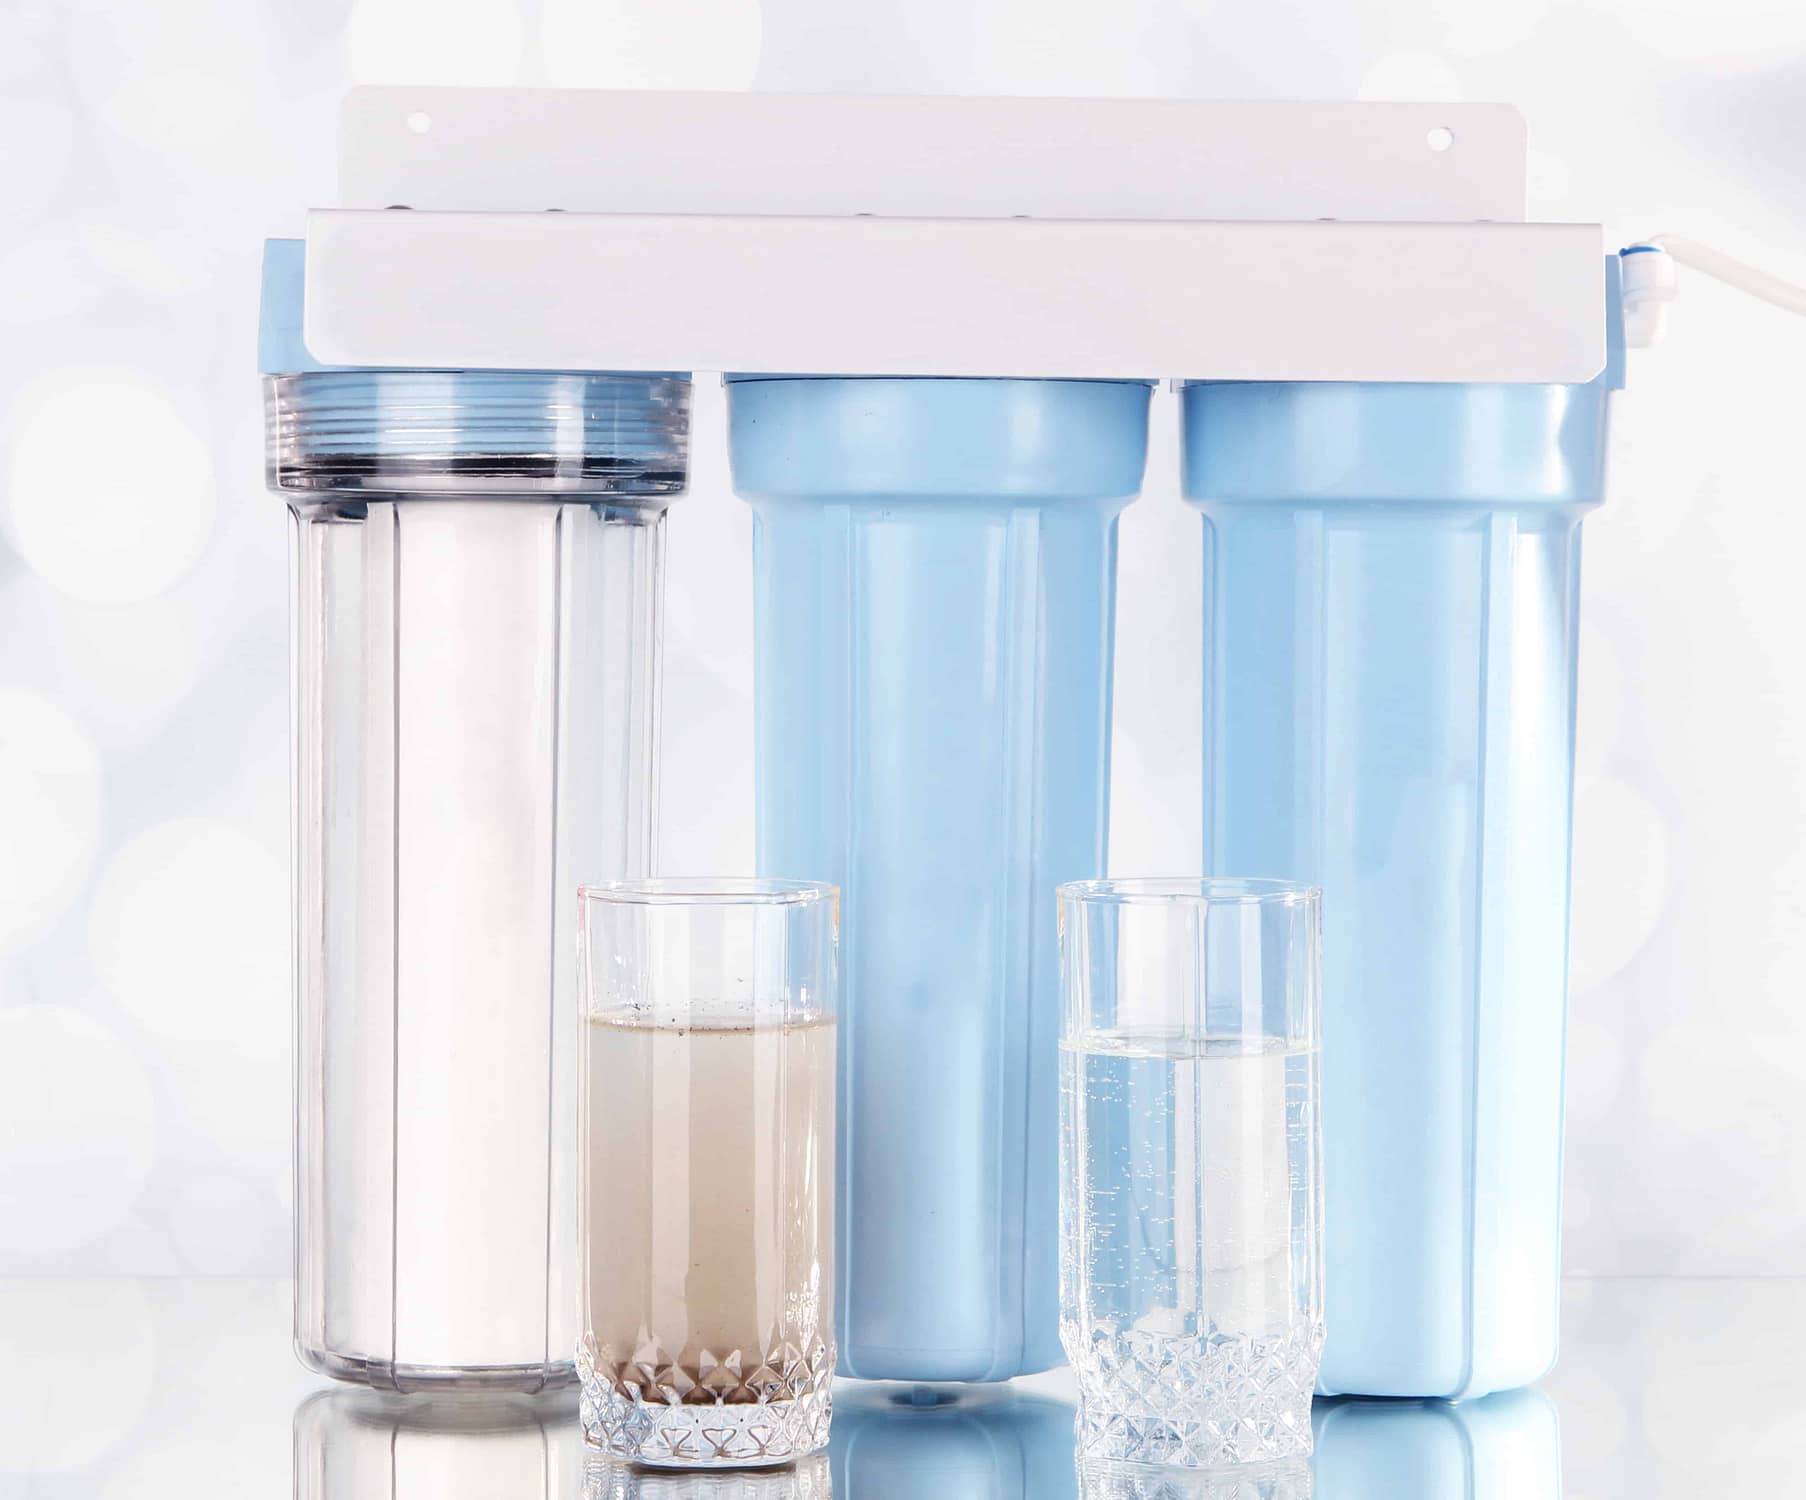 Filter system for water treatment with glasses of clean and dirty water on bright background